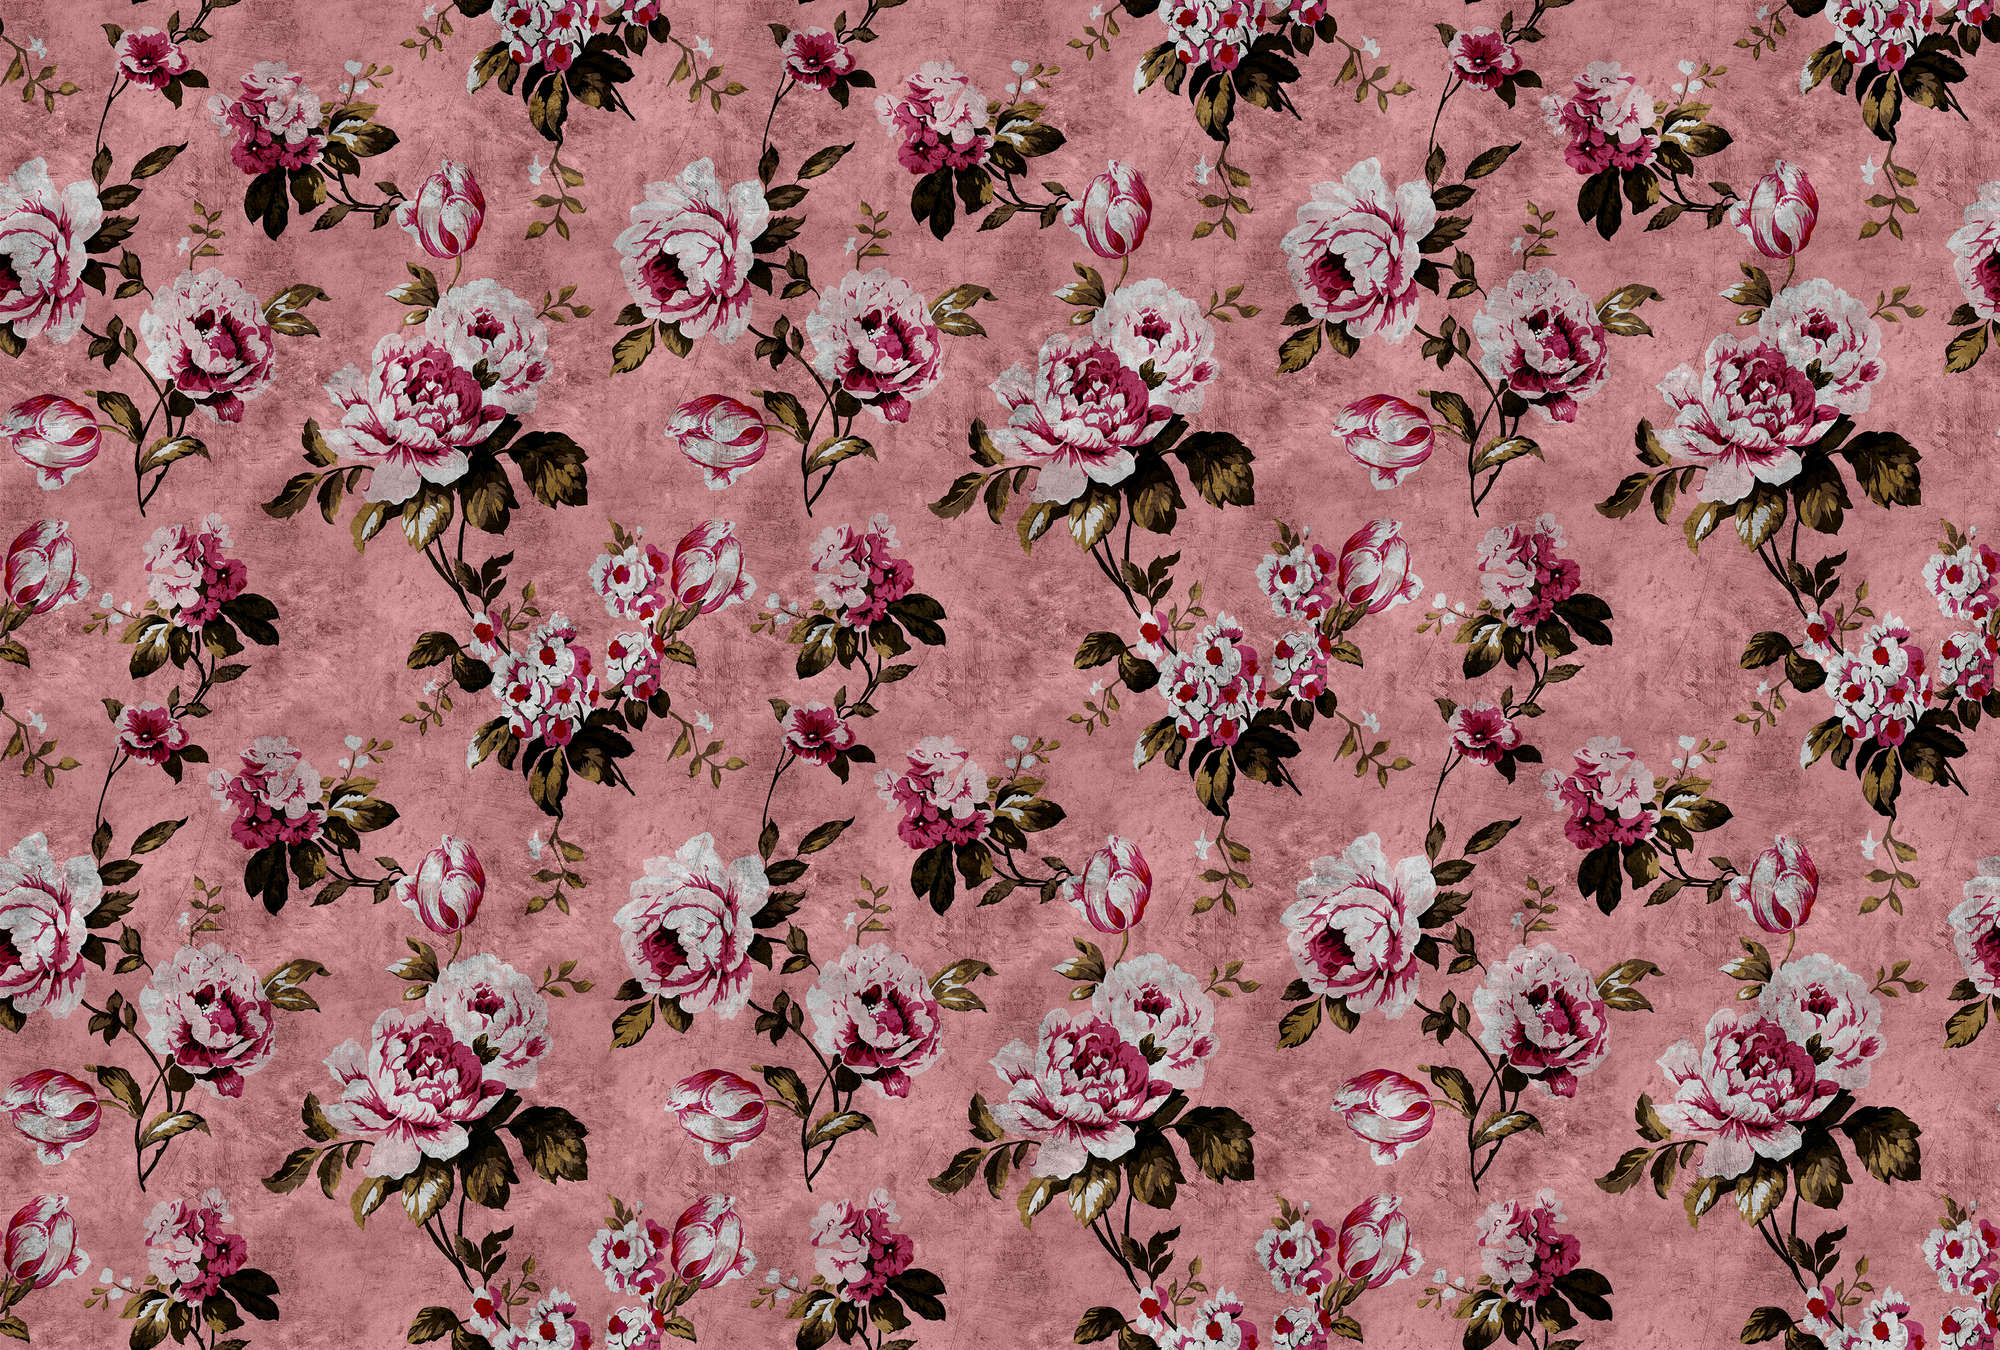             Wild roses 4 - Roses photo wallpaper in retro look, pink in scratchy structure - Pink, Red | Premium smooth fleece
        